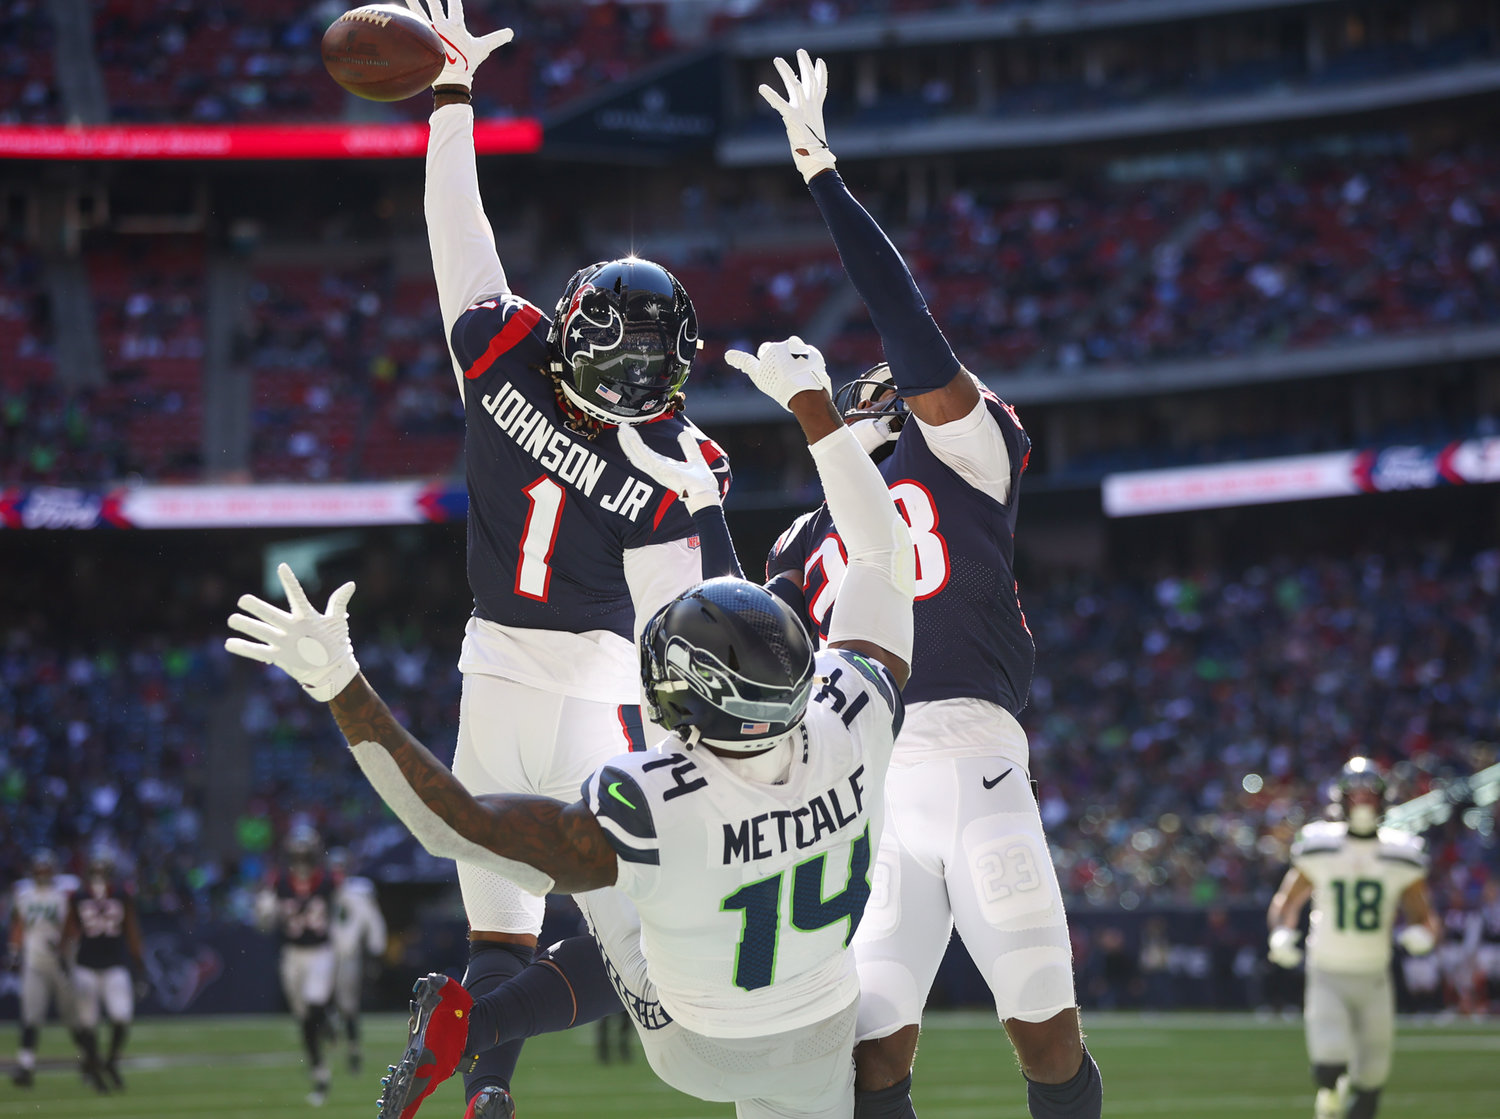 Houston Texans cornerback Lonnie Johnson Jr. (1) knocks down a pass intended for Seattle Seahawks wide receiver DK Metcalf (14) in the end zone during the second half of an NFL game between the Seahawks and the Texans on December 12, 2021 in Houston, Texas.